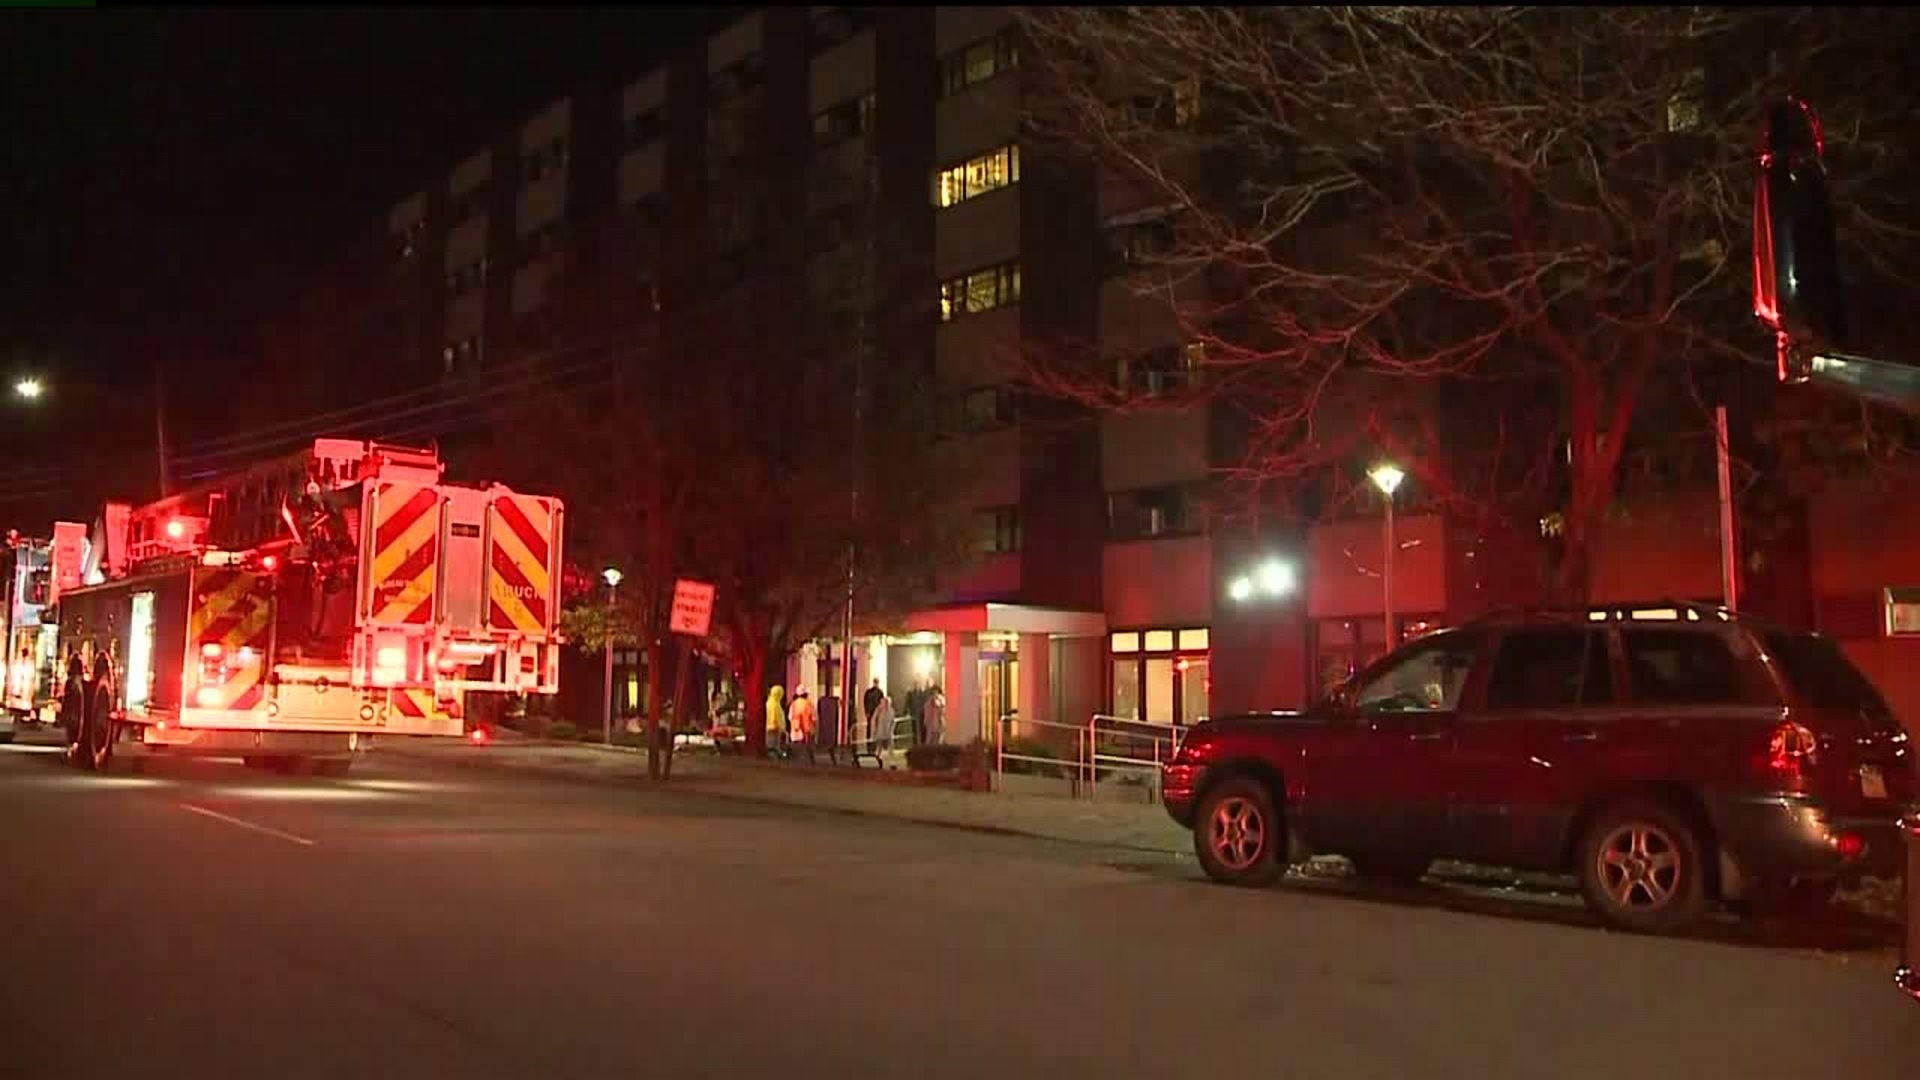 30 People Displaced After Fire in Scranton